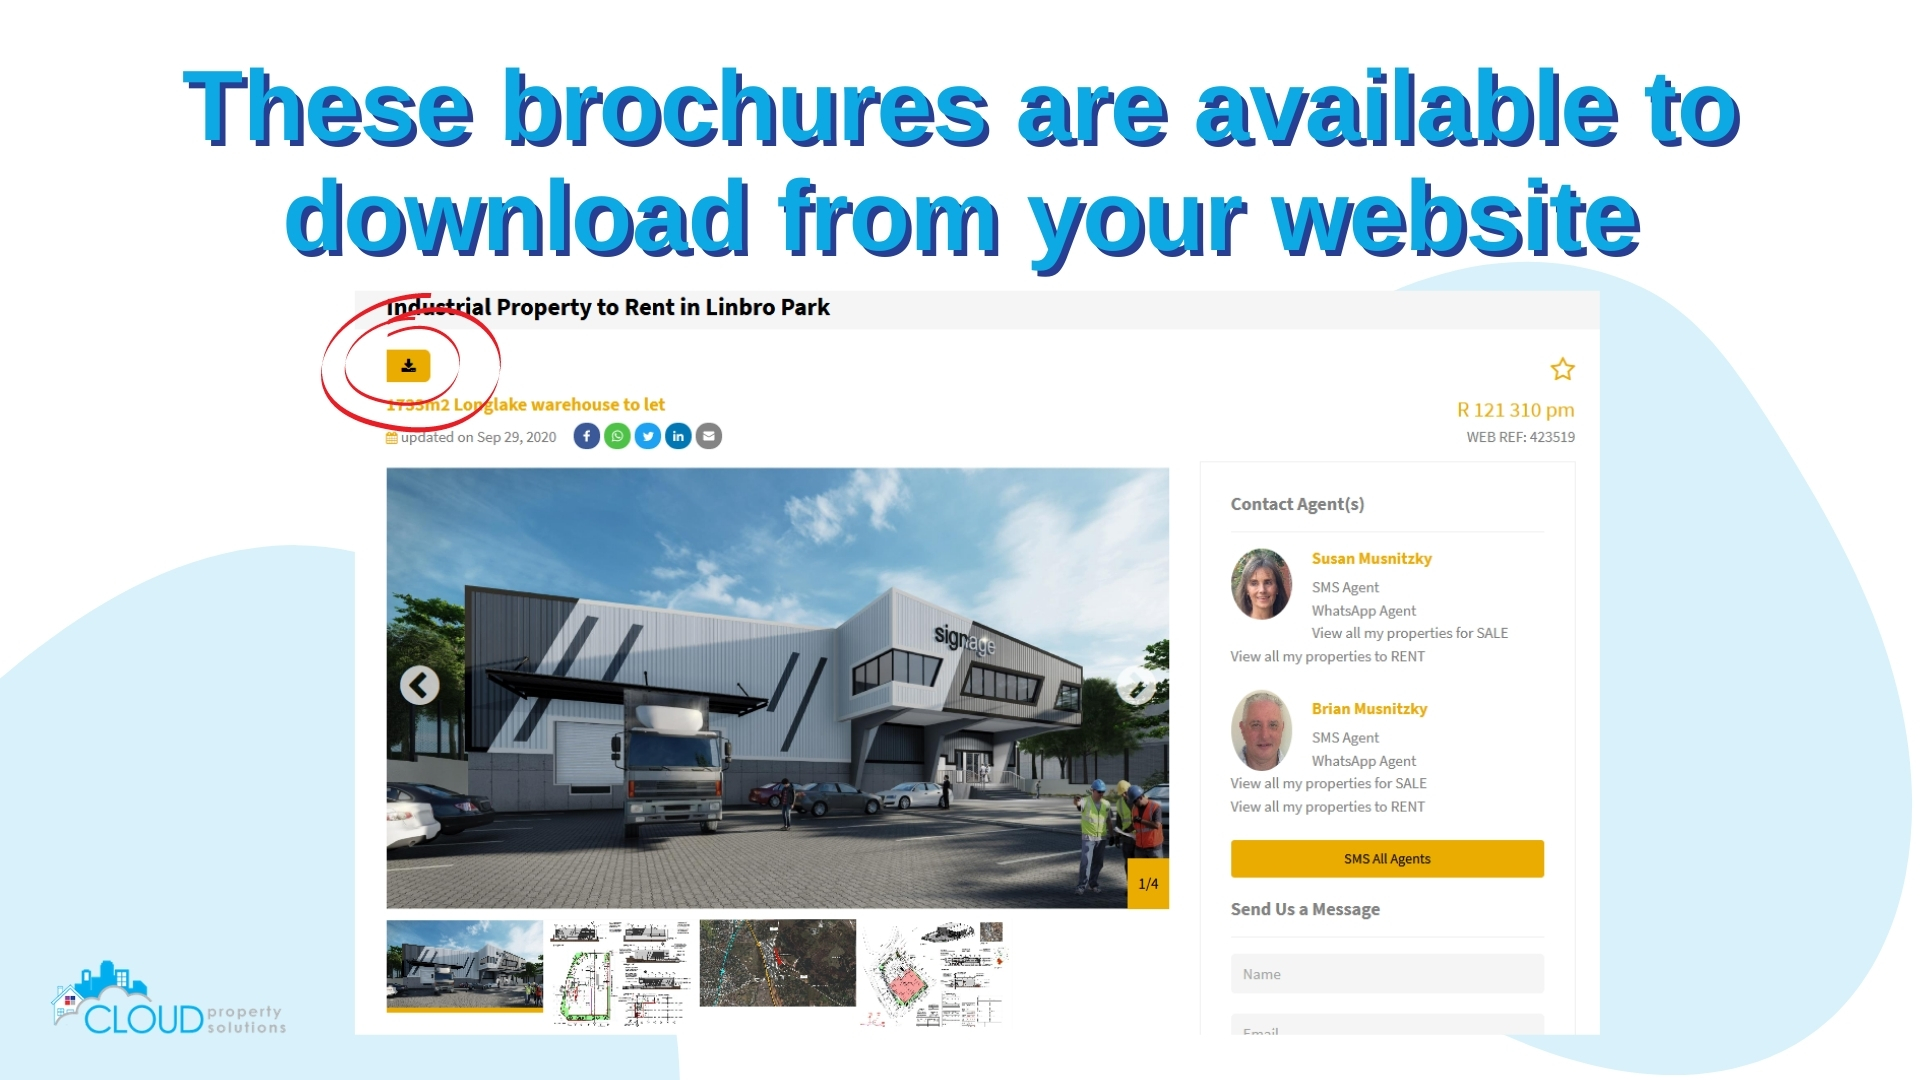 Website visitors can downlaod property brochures when viewing listing information